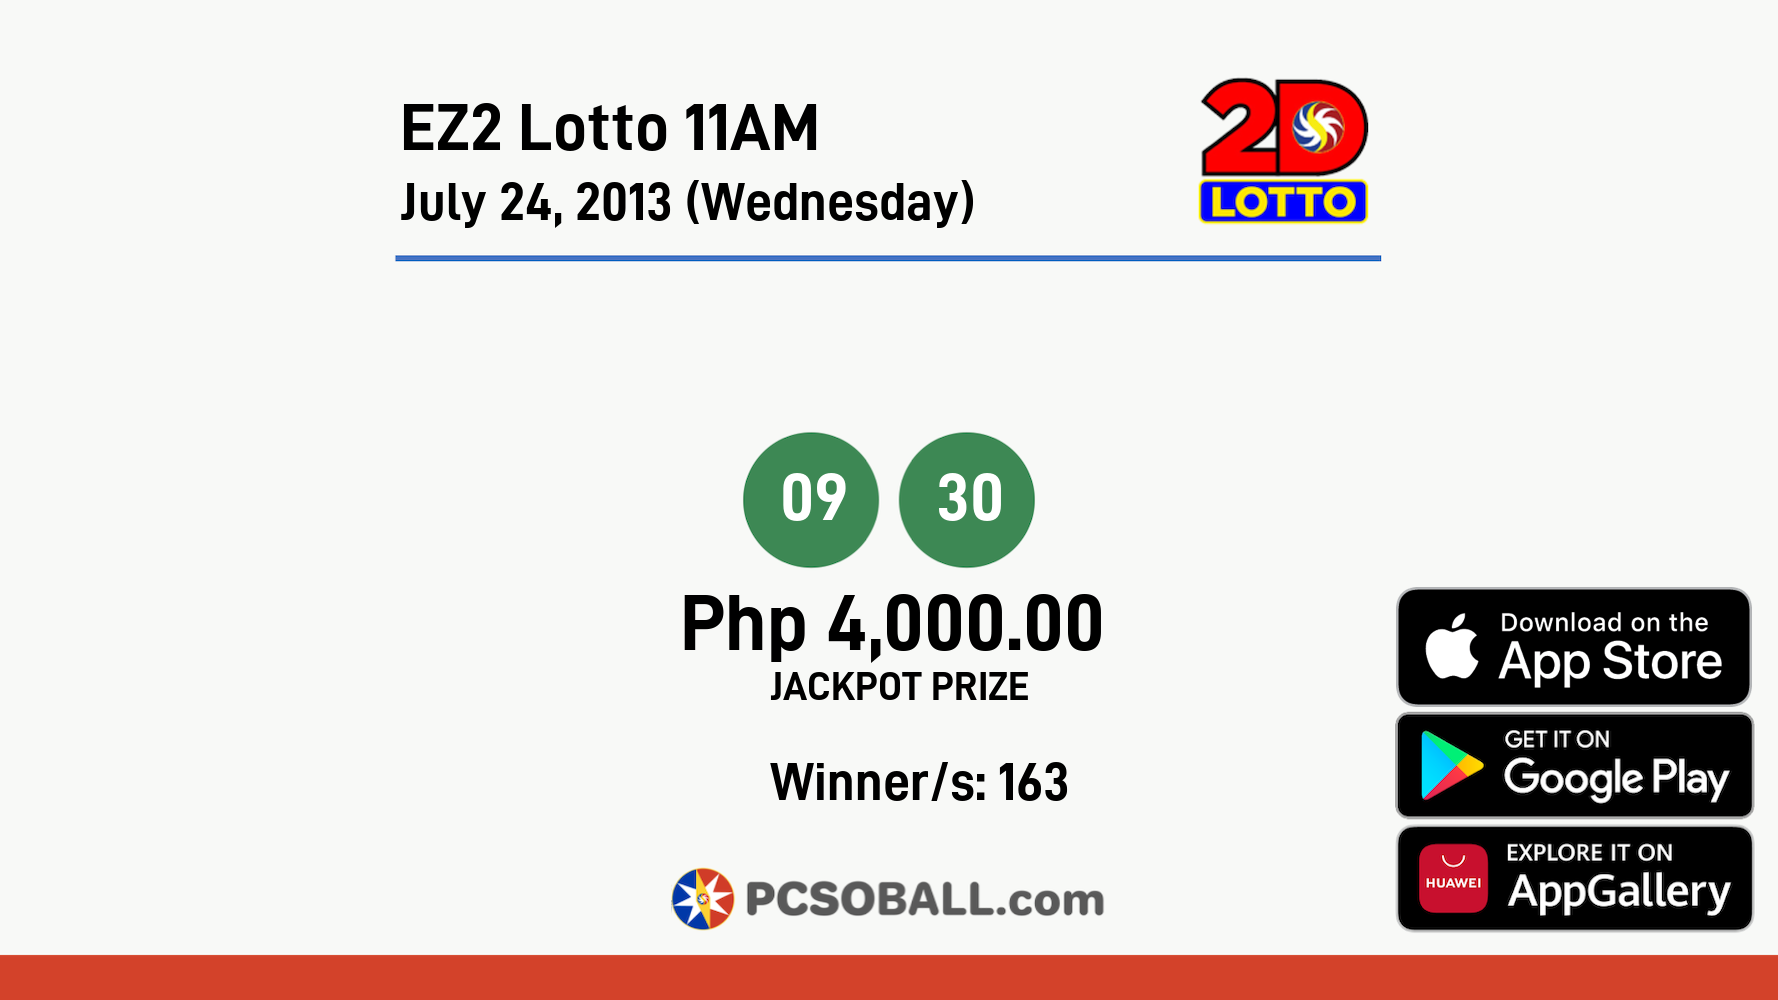 EZ2 Lotto 11AM July 24, 2013 (Wednesday) Result